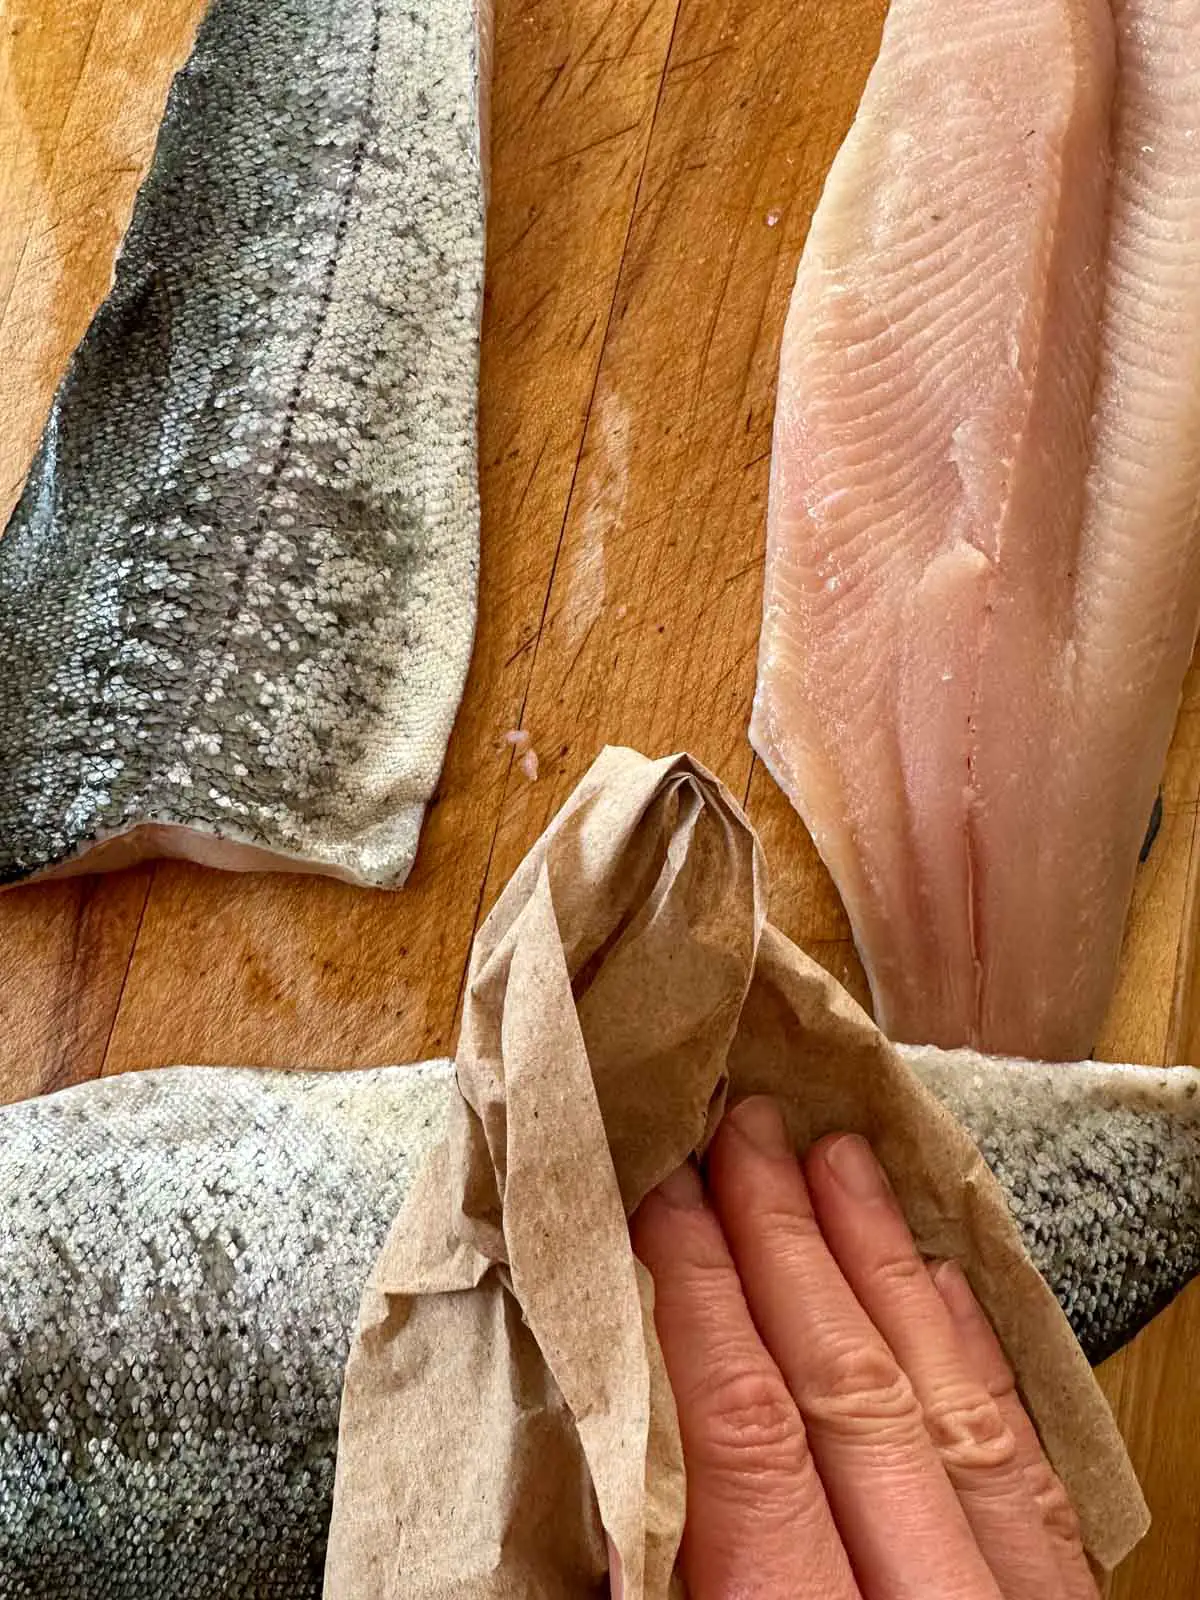 Rainbow trout fillets on a wooden cutting board with a paper towel being pressed down by a hand on one of the fillets to dry the fish.